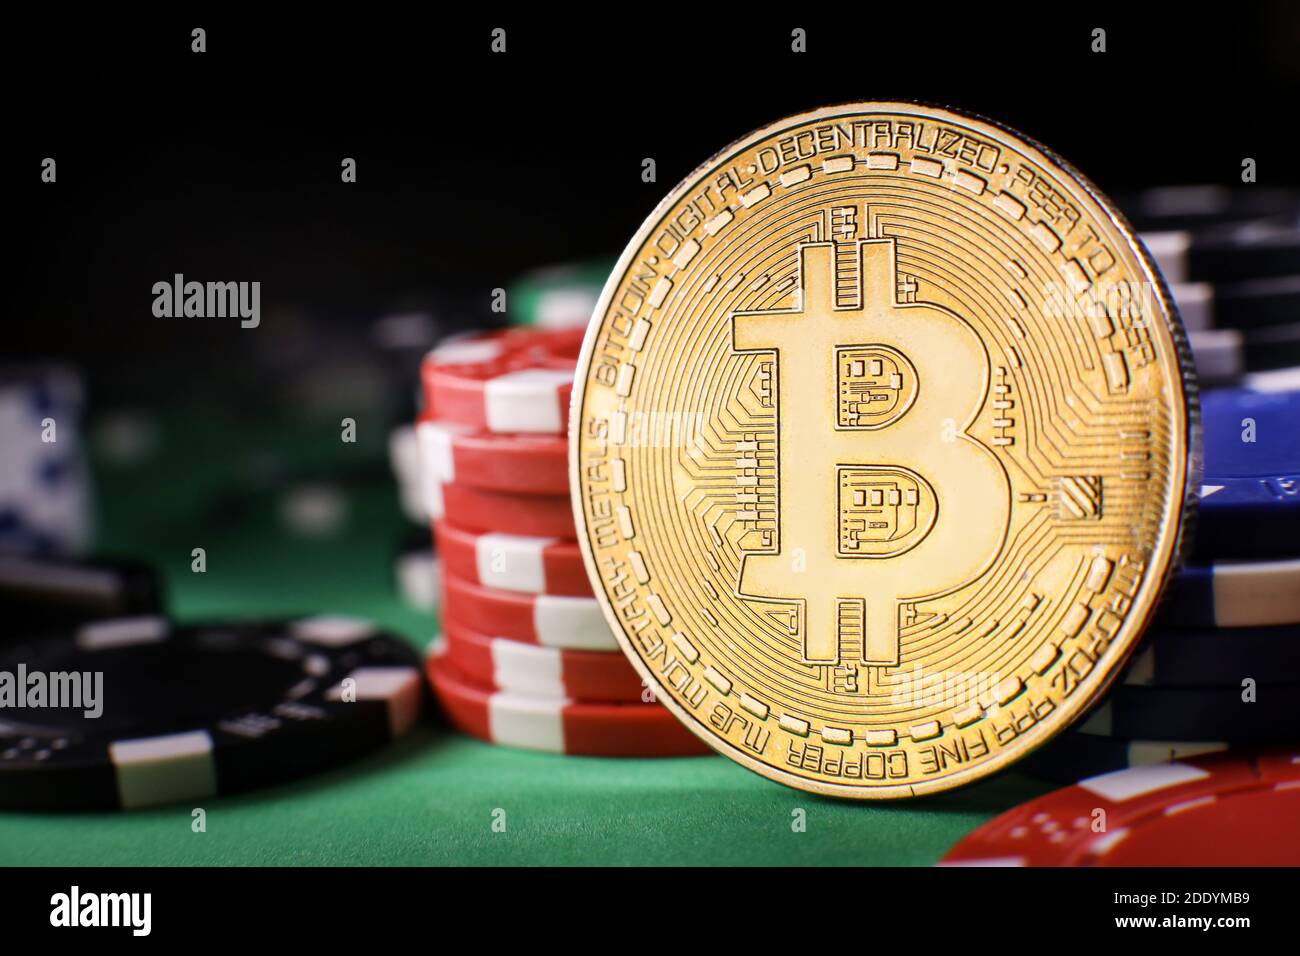 11 Things Twitter Wants Yout To Forget About play casino games with bitcoin